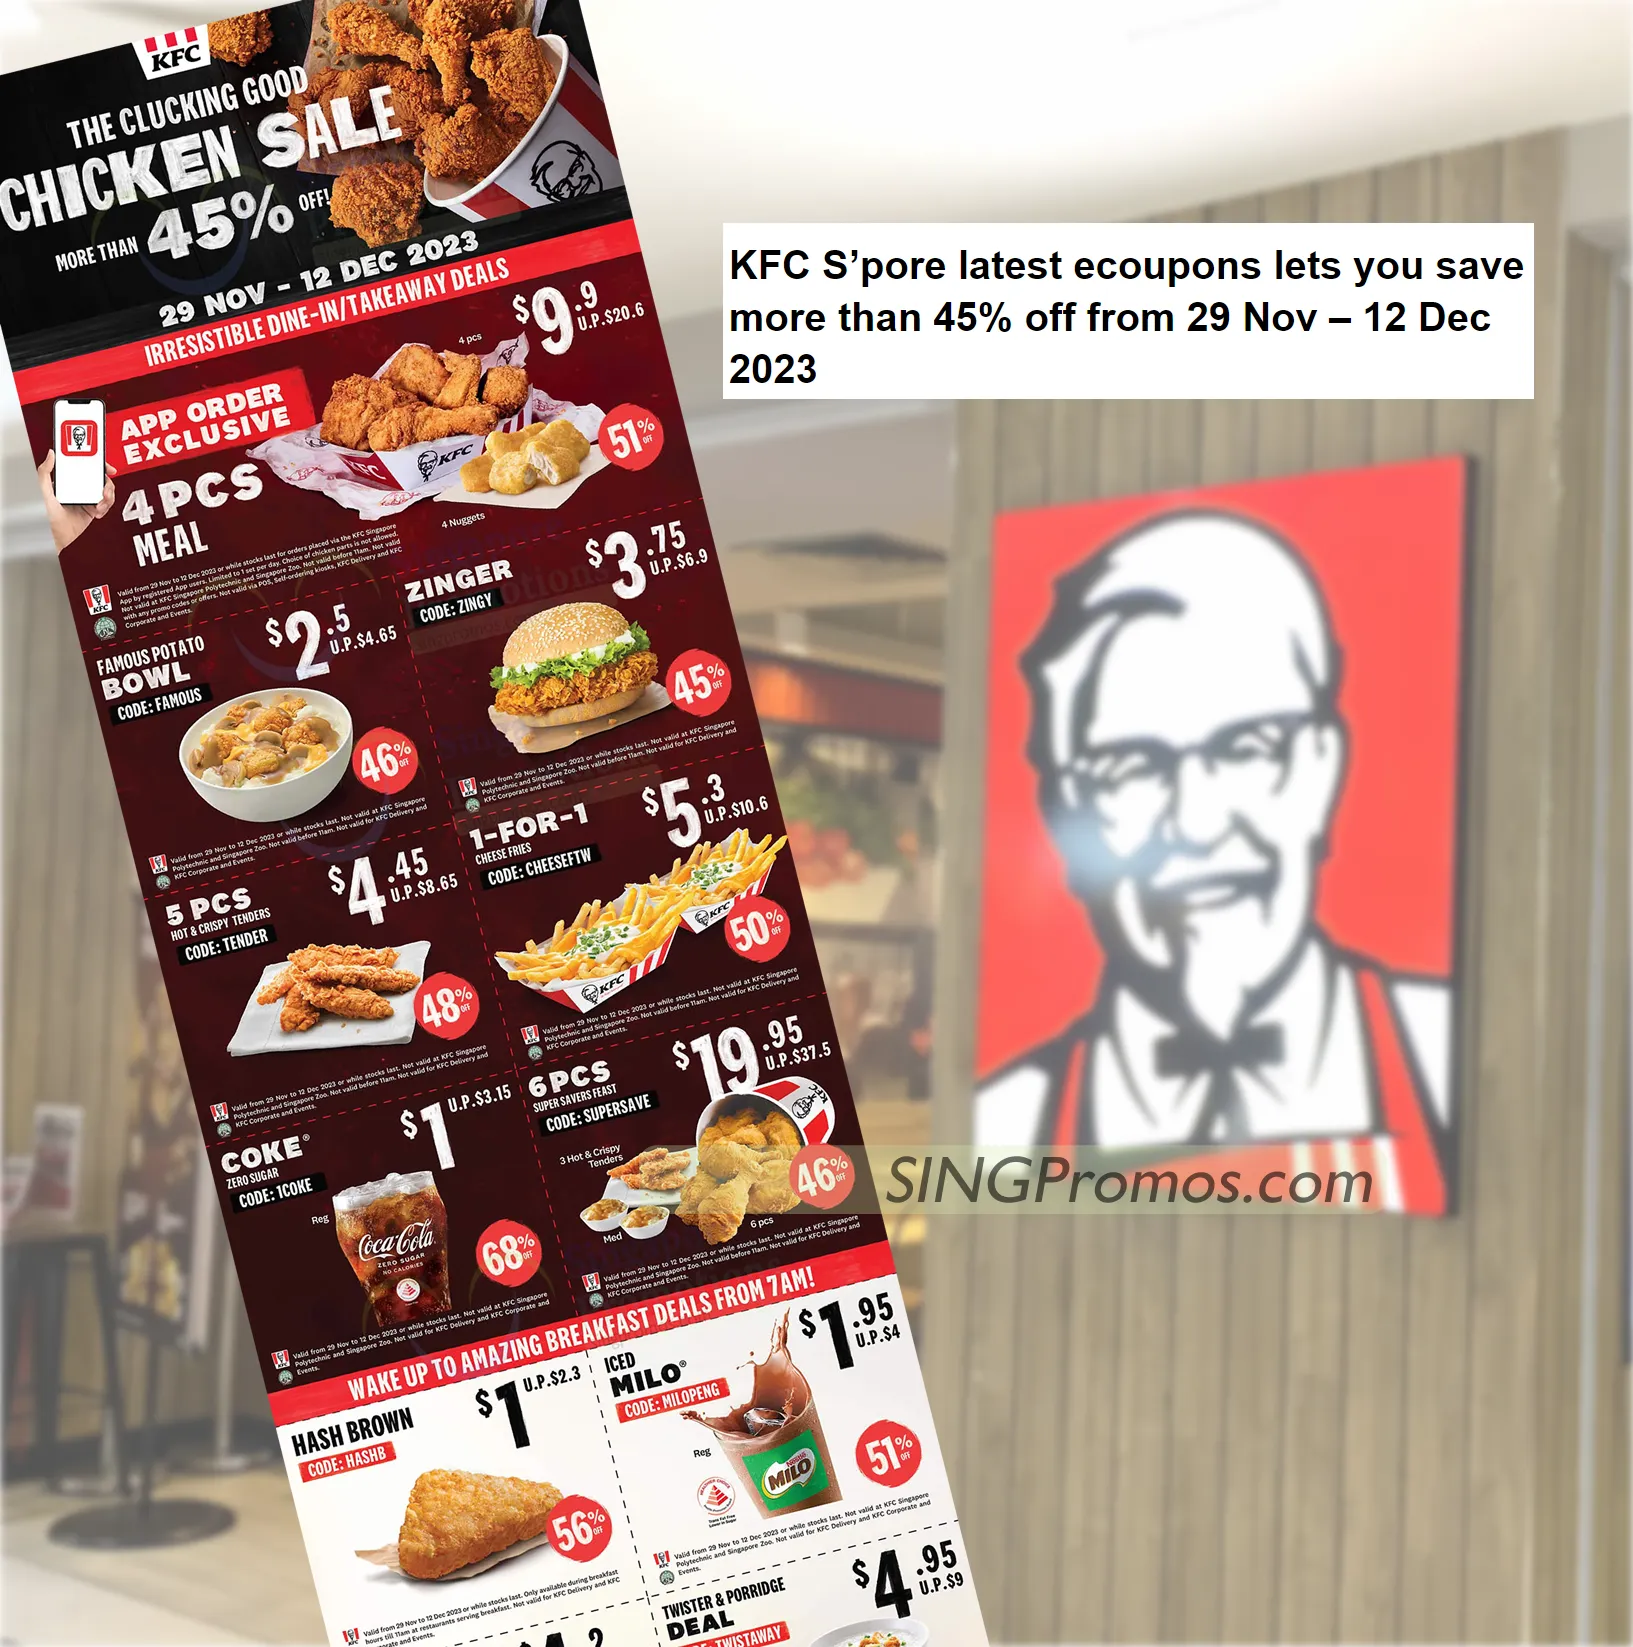 KFC S'pore New Coupons - $3.75 Zinger & More's images(0)